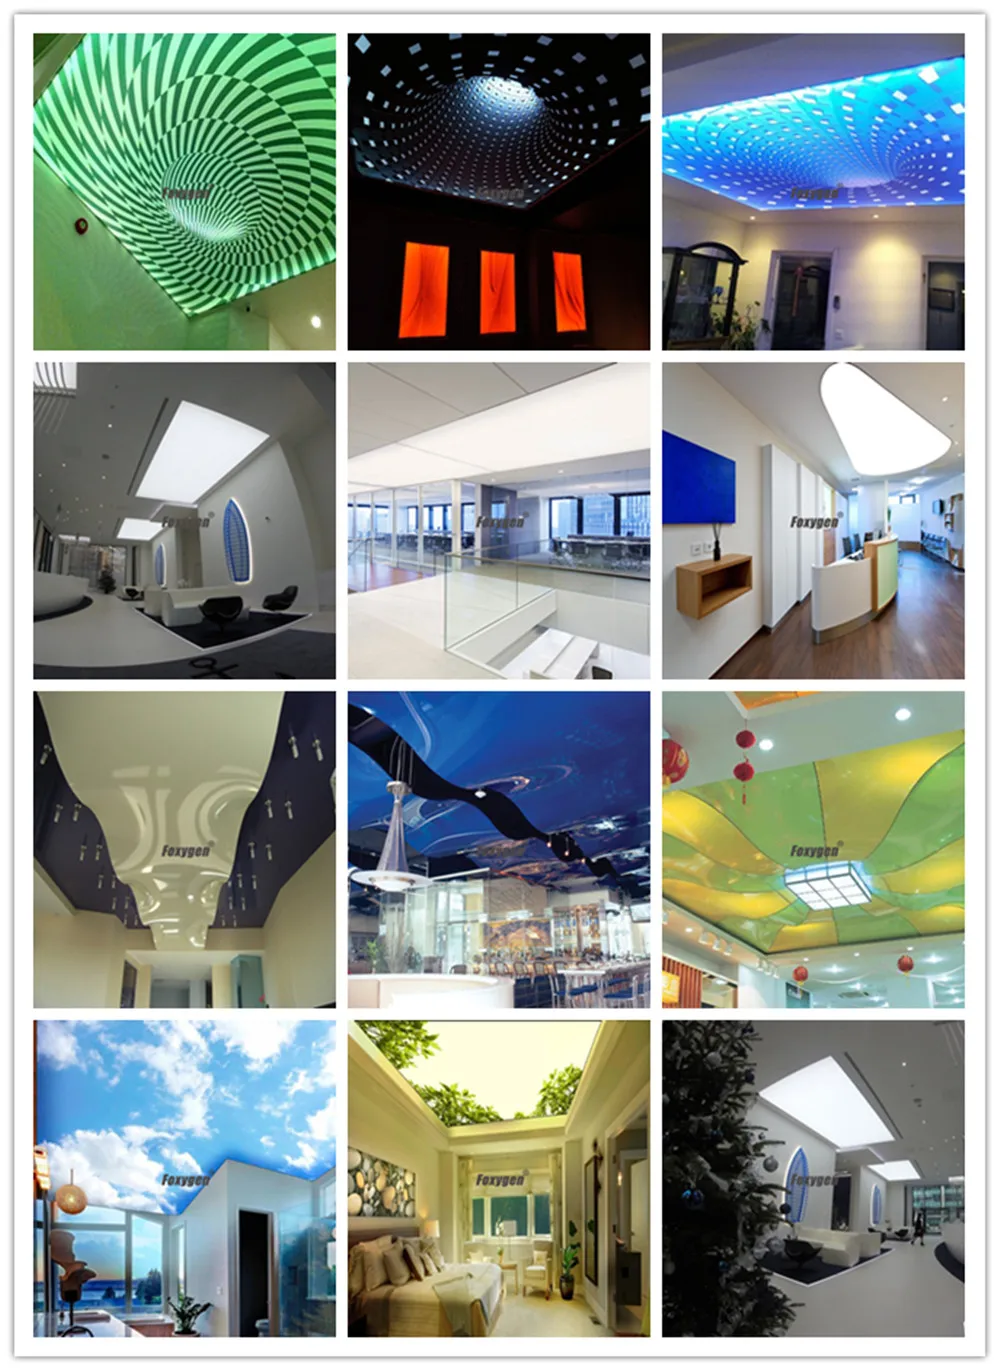 Foxygen uv and eco print pvc stretch fabric ceiling film blue 3d wave sky design for office hotel mall home price china export factory price (4)_副本